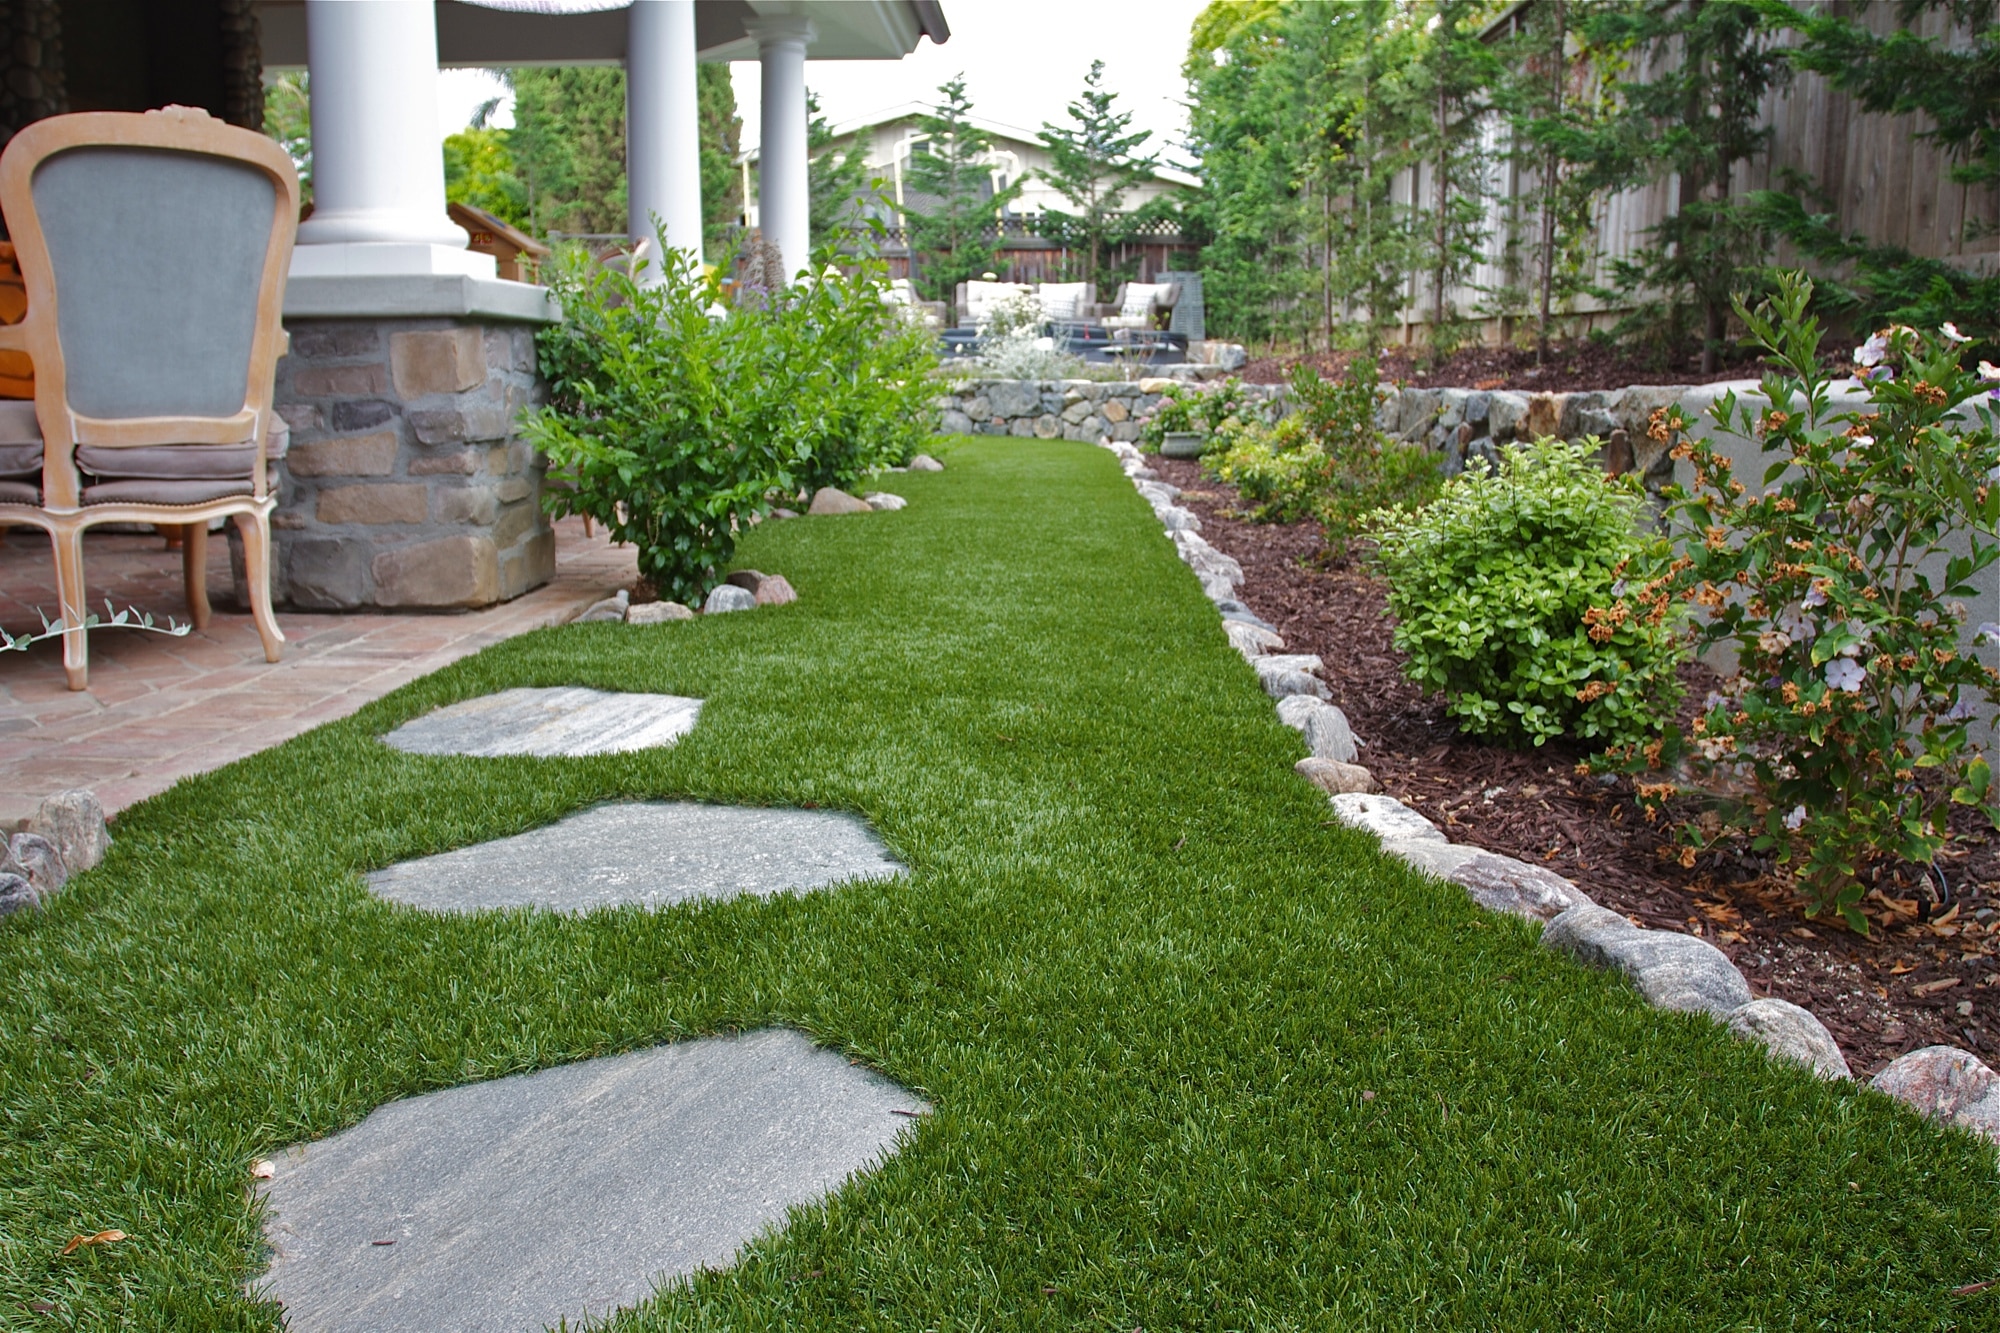 Man-made Grass - What are Benefits of Putting in Artificial Grass ...